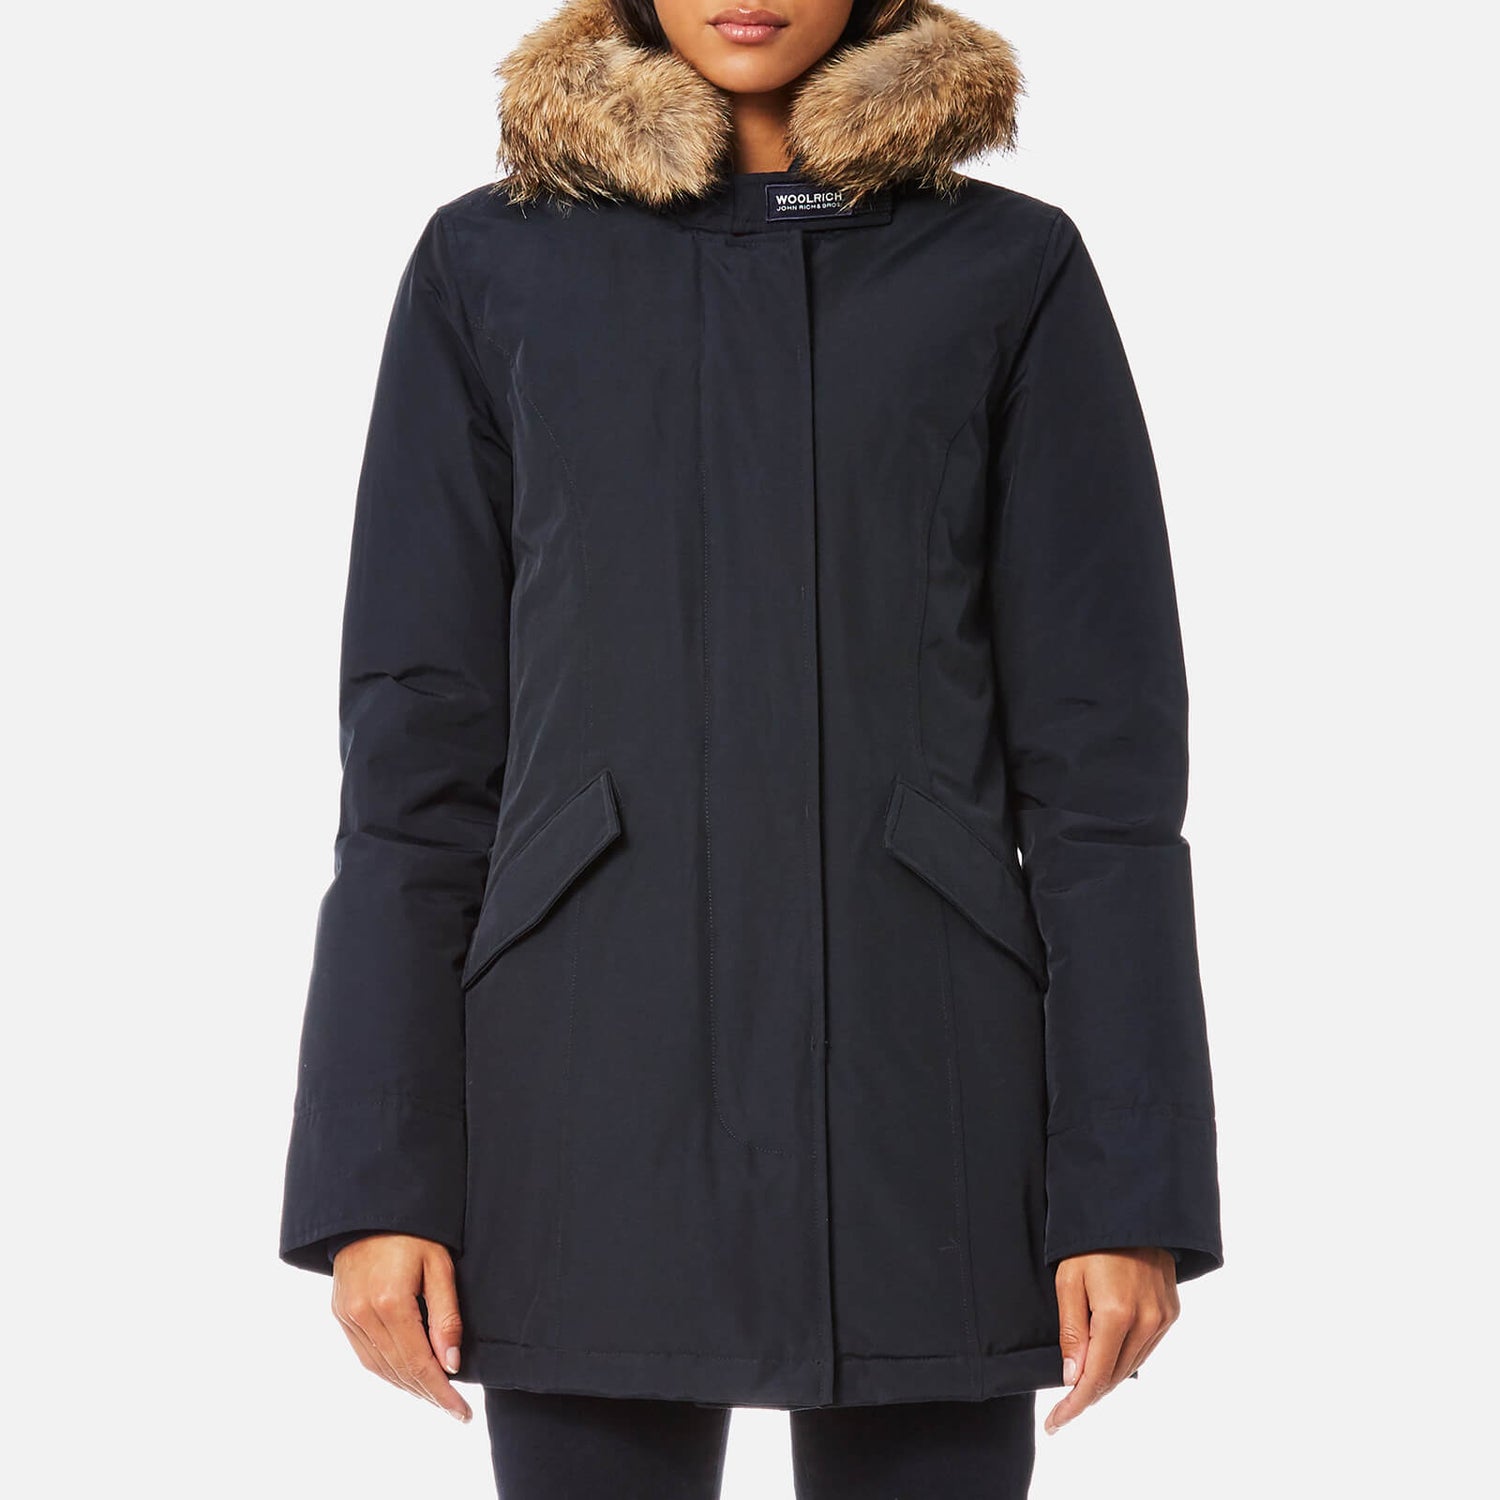 Woolrich Women's Arctic Parka - Navy - Free UK Delivery Available